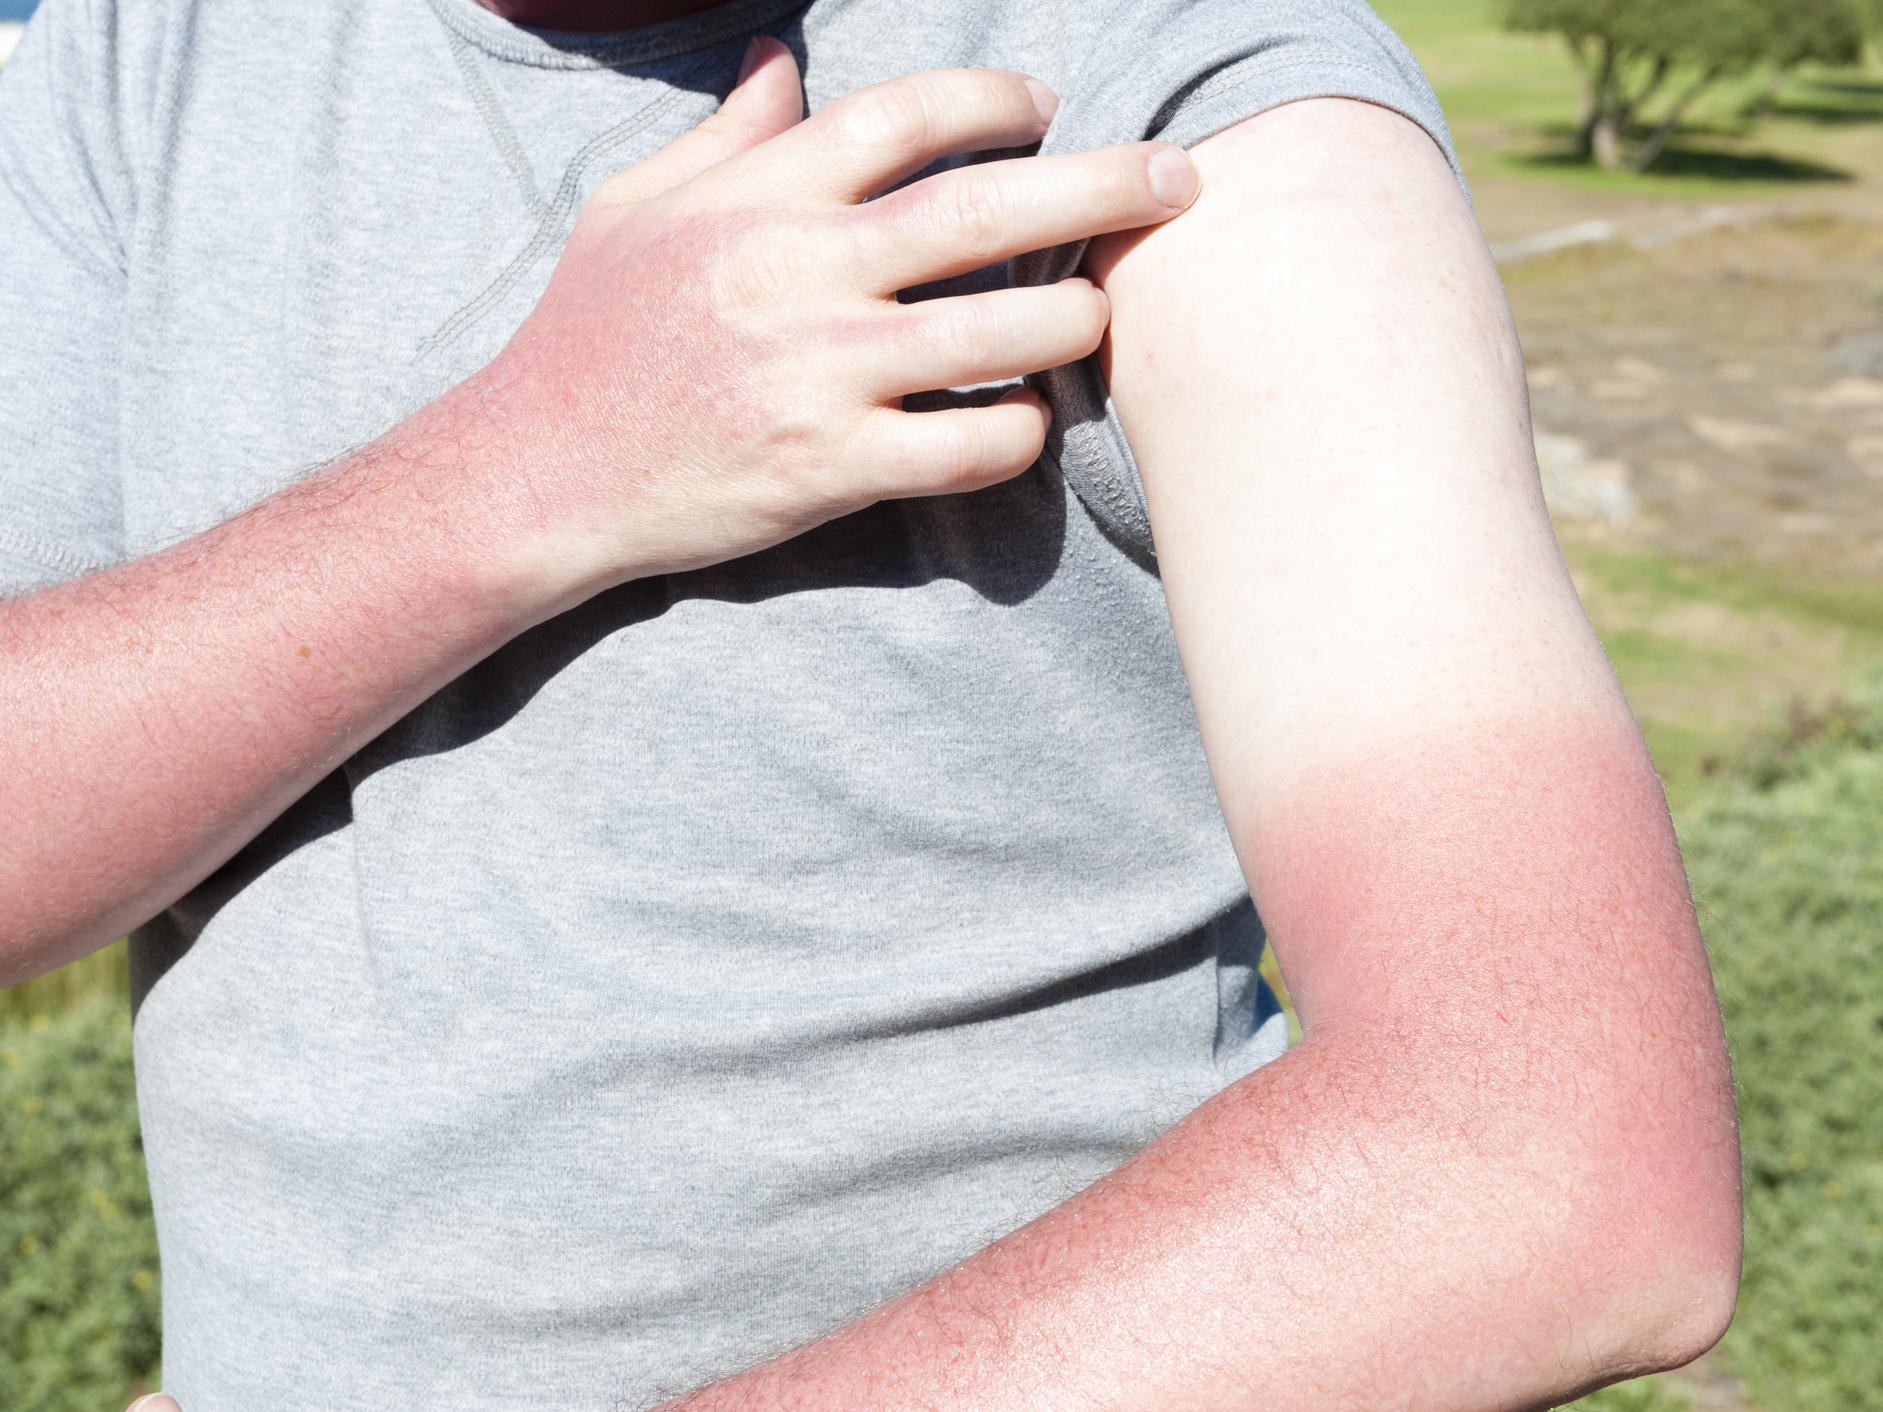 Scientists have found genes that are involved in sunburn and tanning